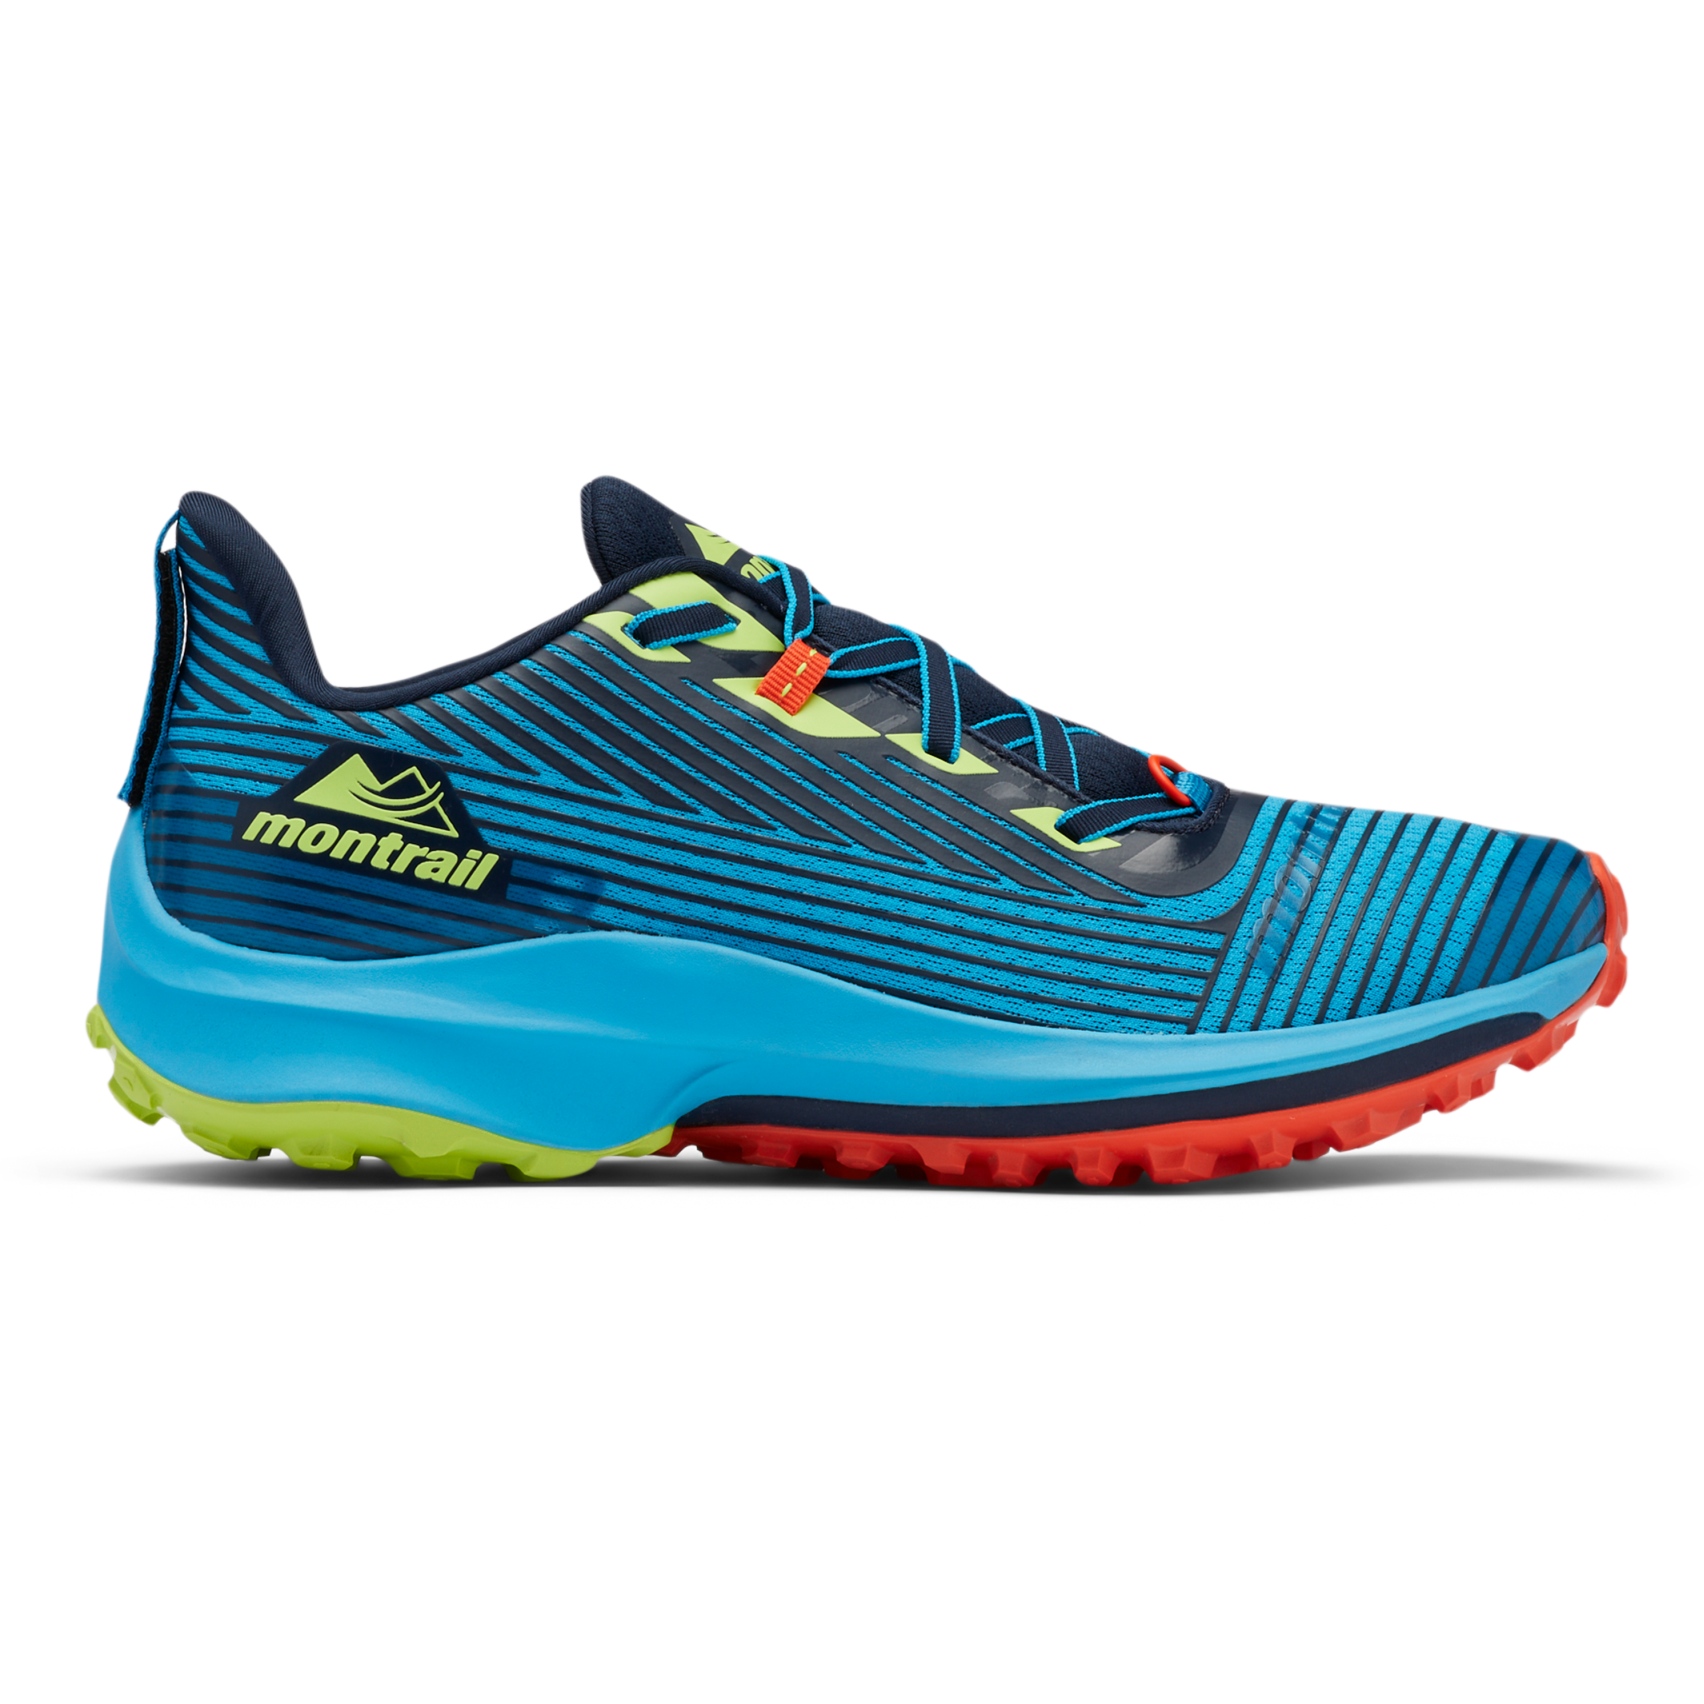 Picture of Columbia Montrail Trinity AG Trail Running Shoes - Collegiate Navy, Fission